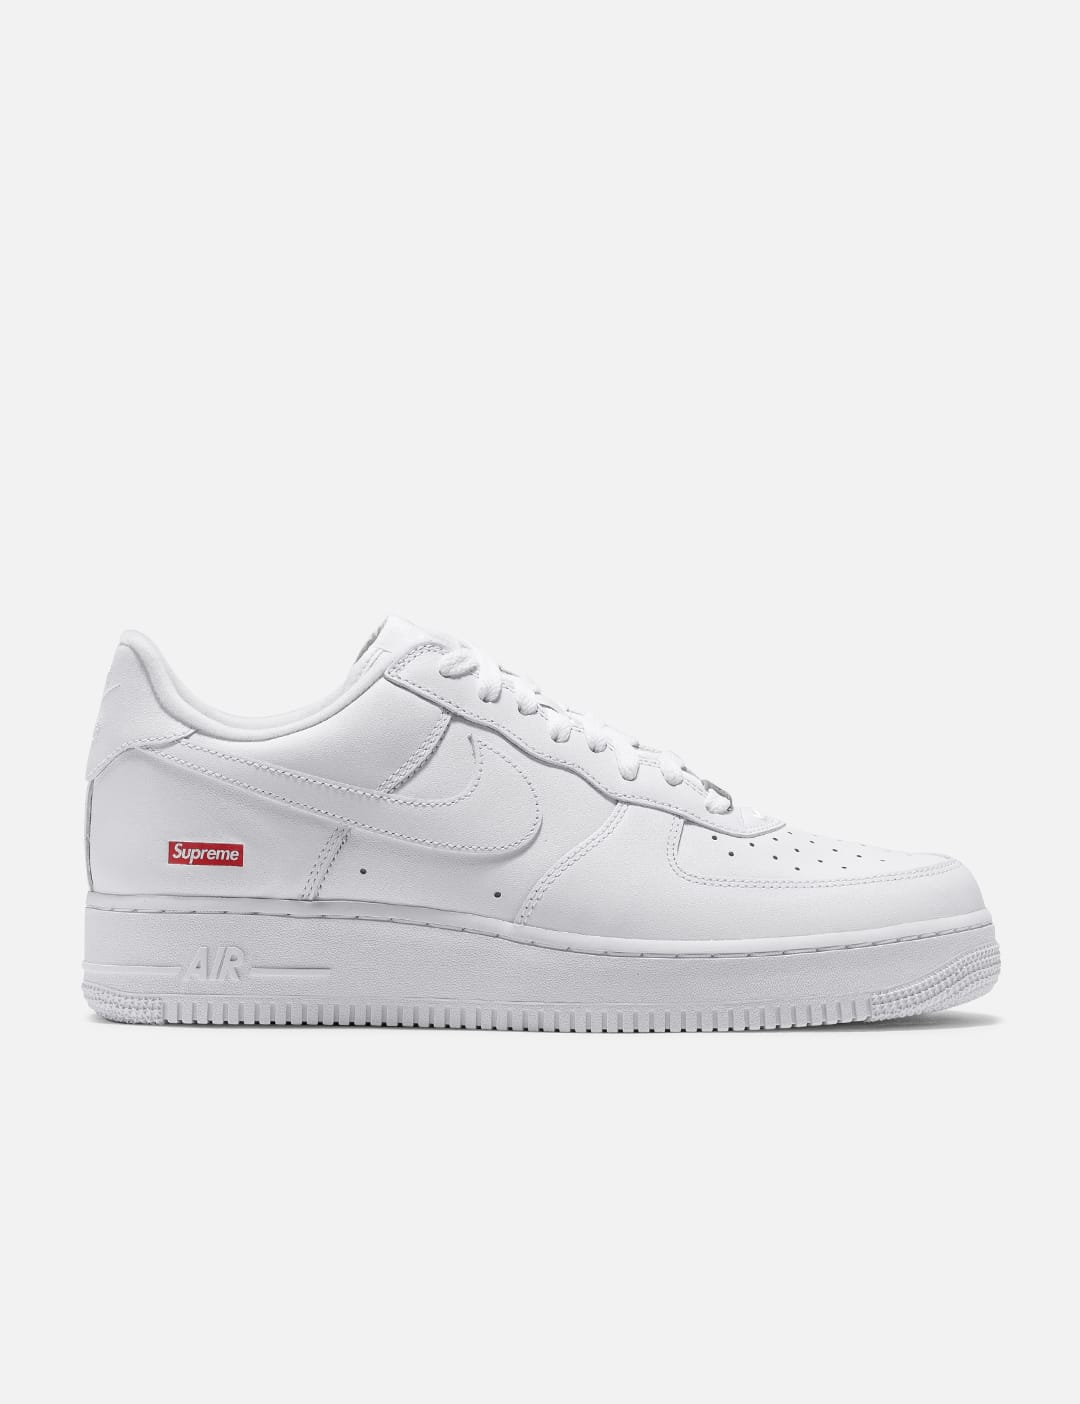 Nike - Nike x Supreme Air Force 1 Low | HBX - Globally Curated